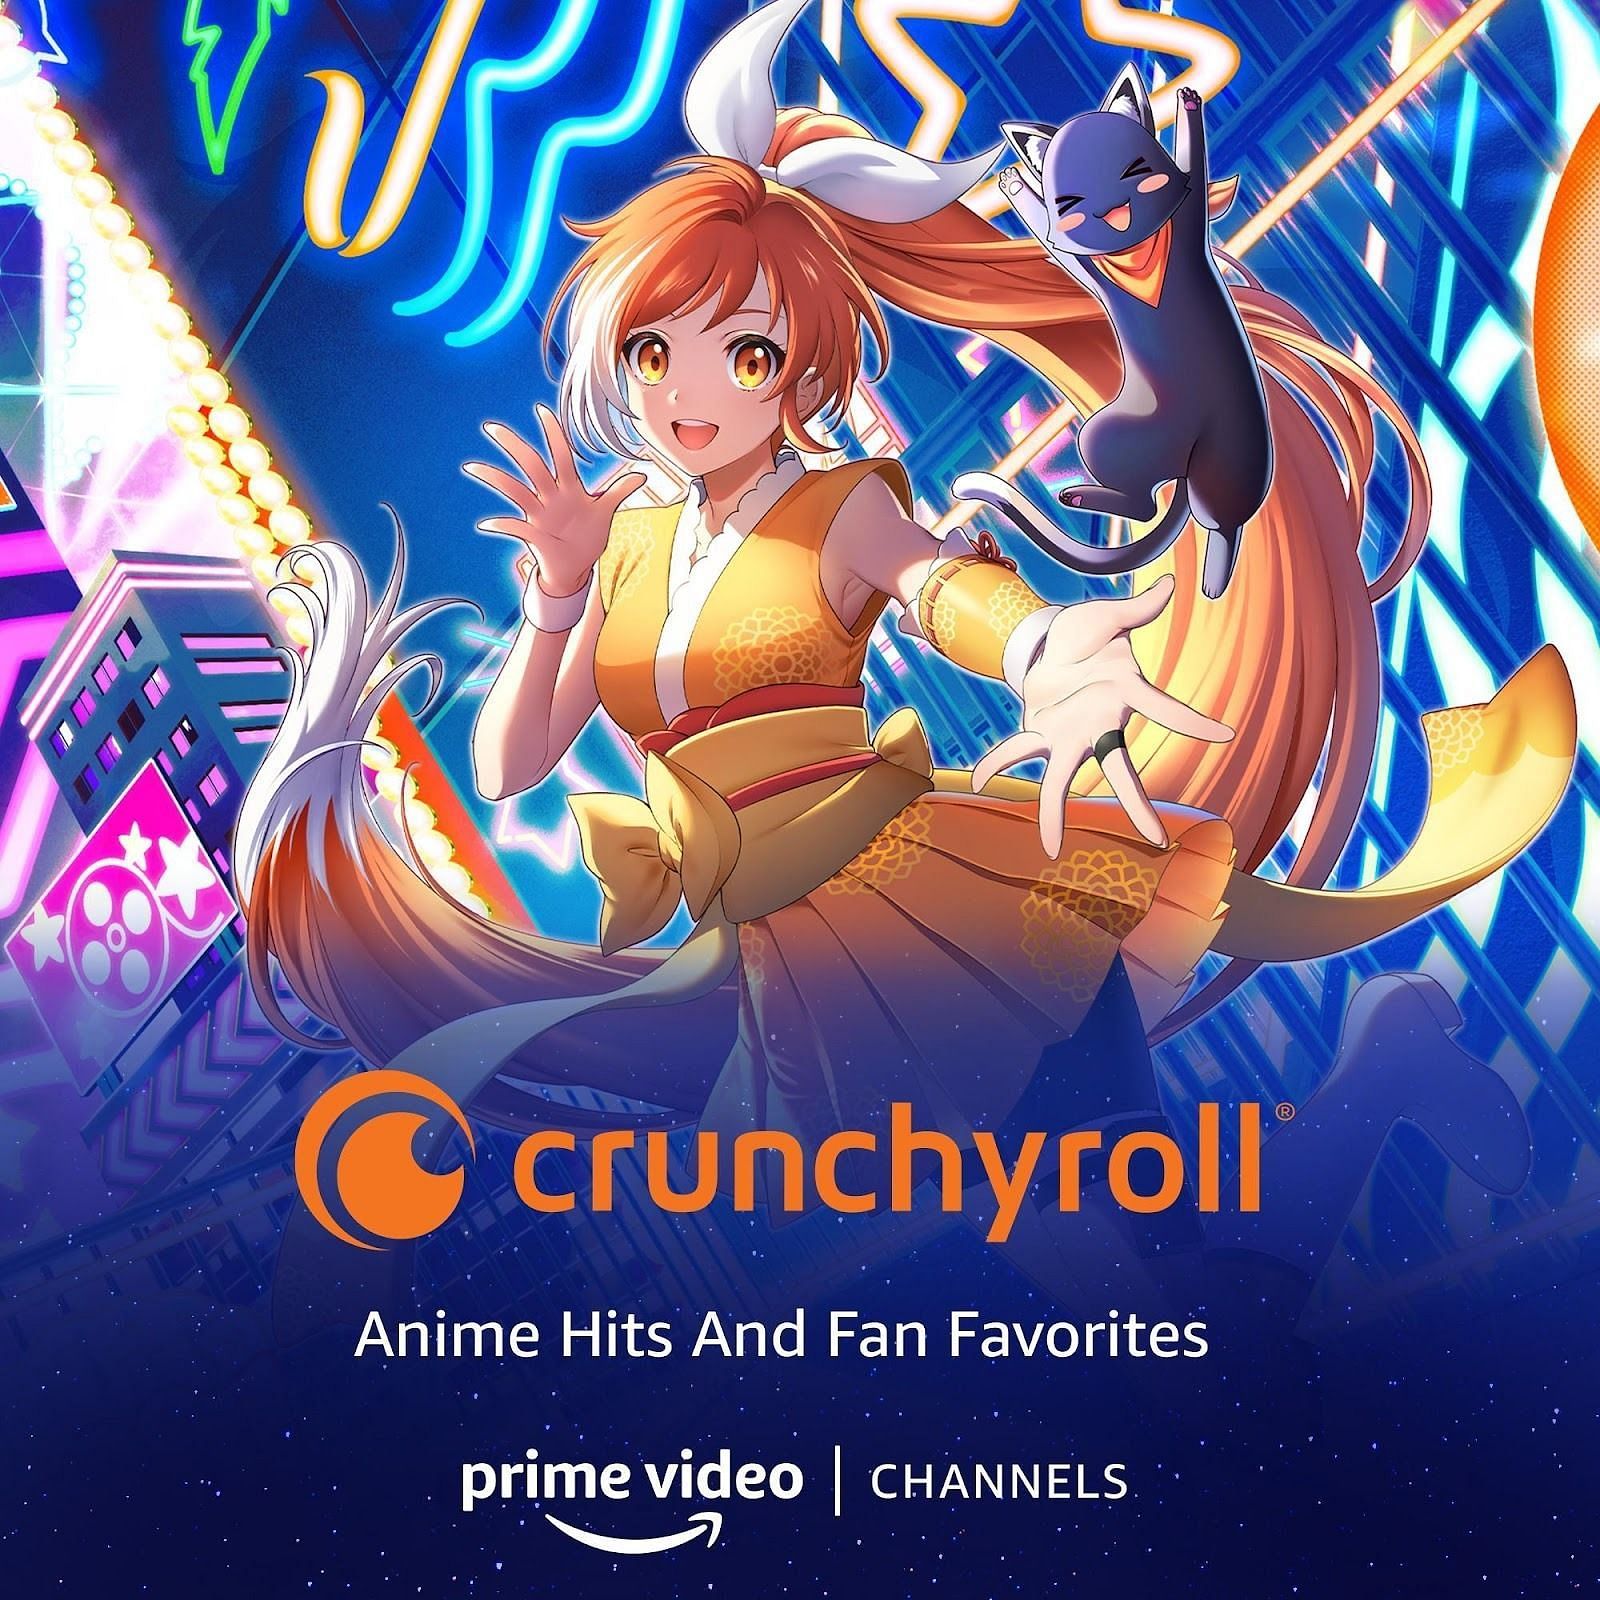 Prime Video adds new channel in India (Image via Crunchyroll)